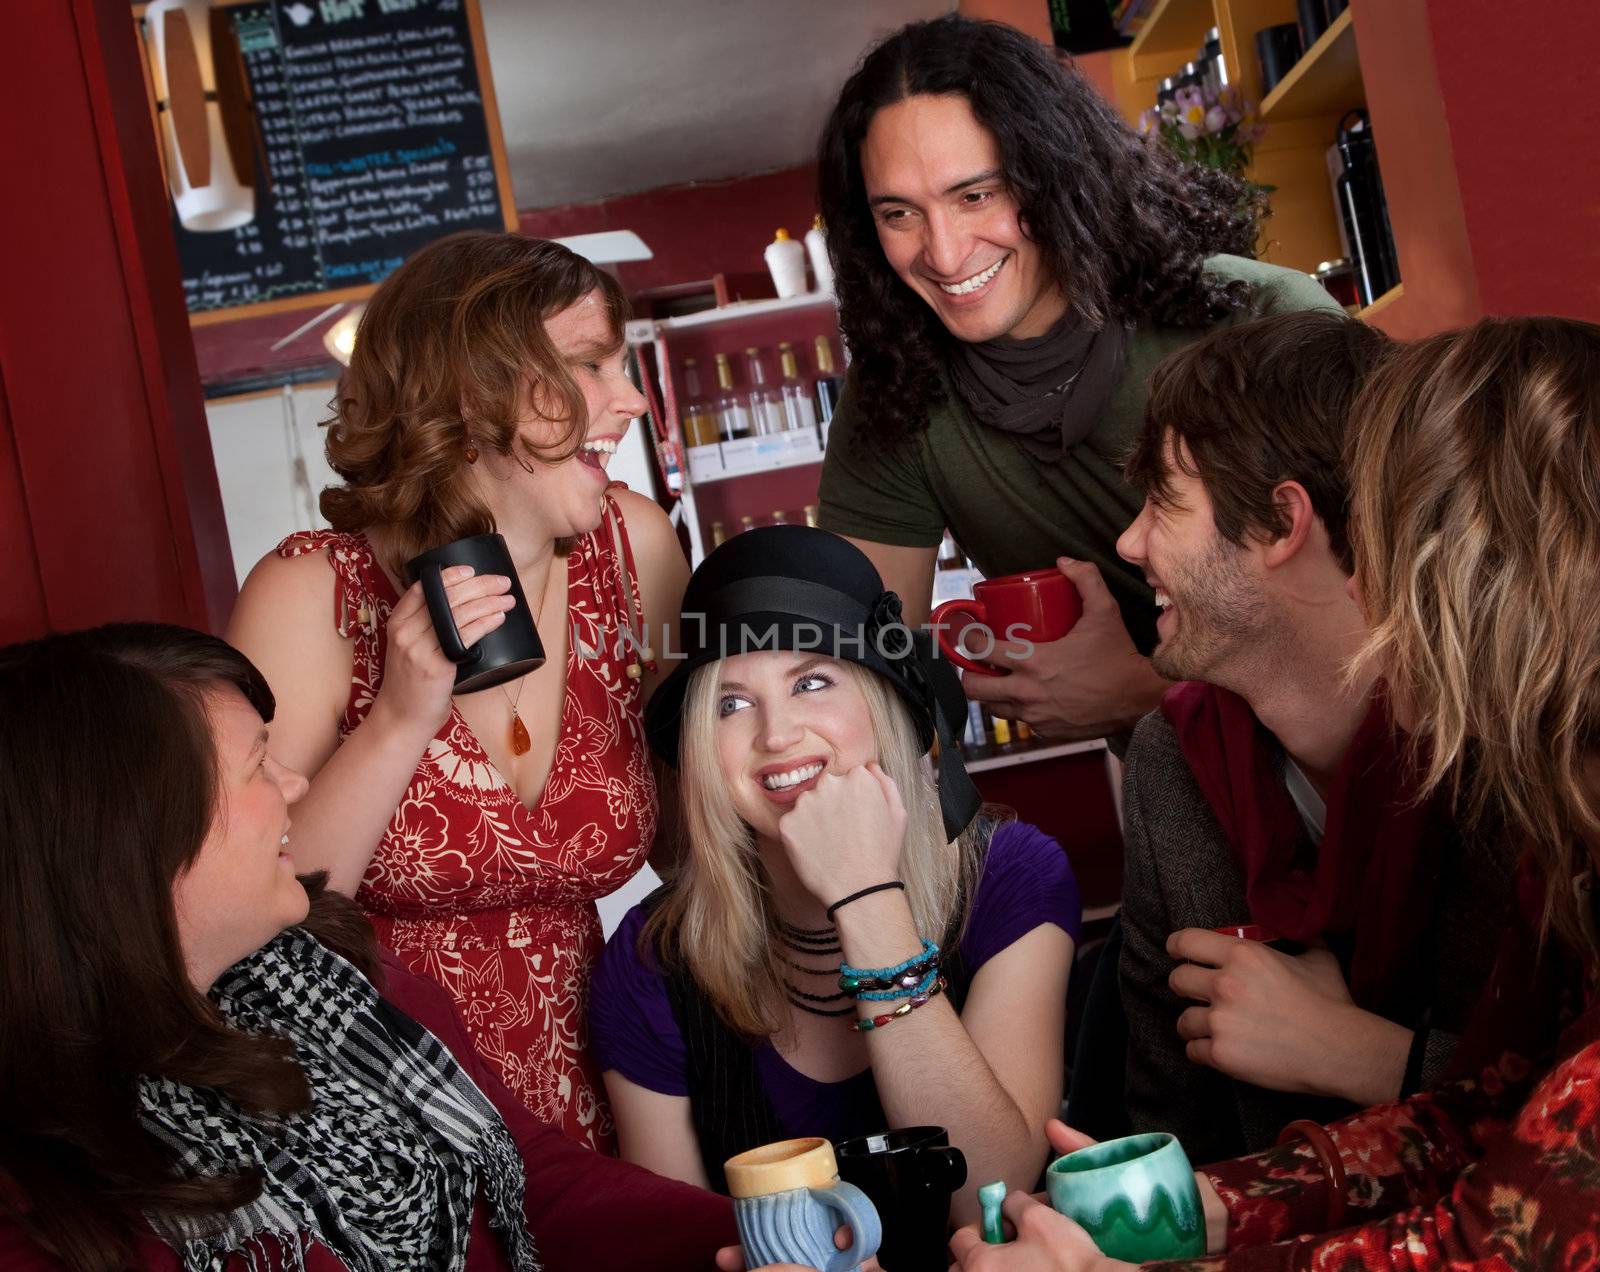 Group of six friends laughing over coffee